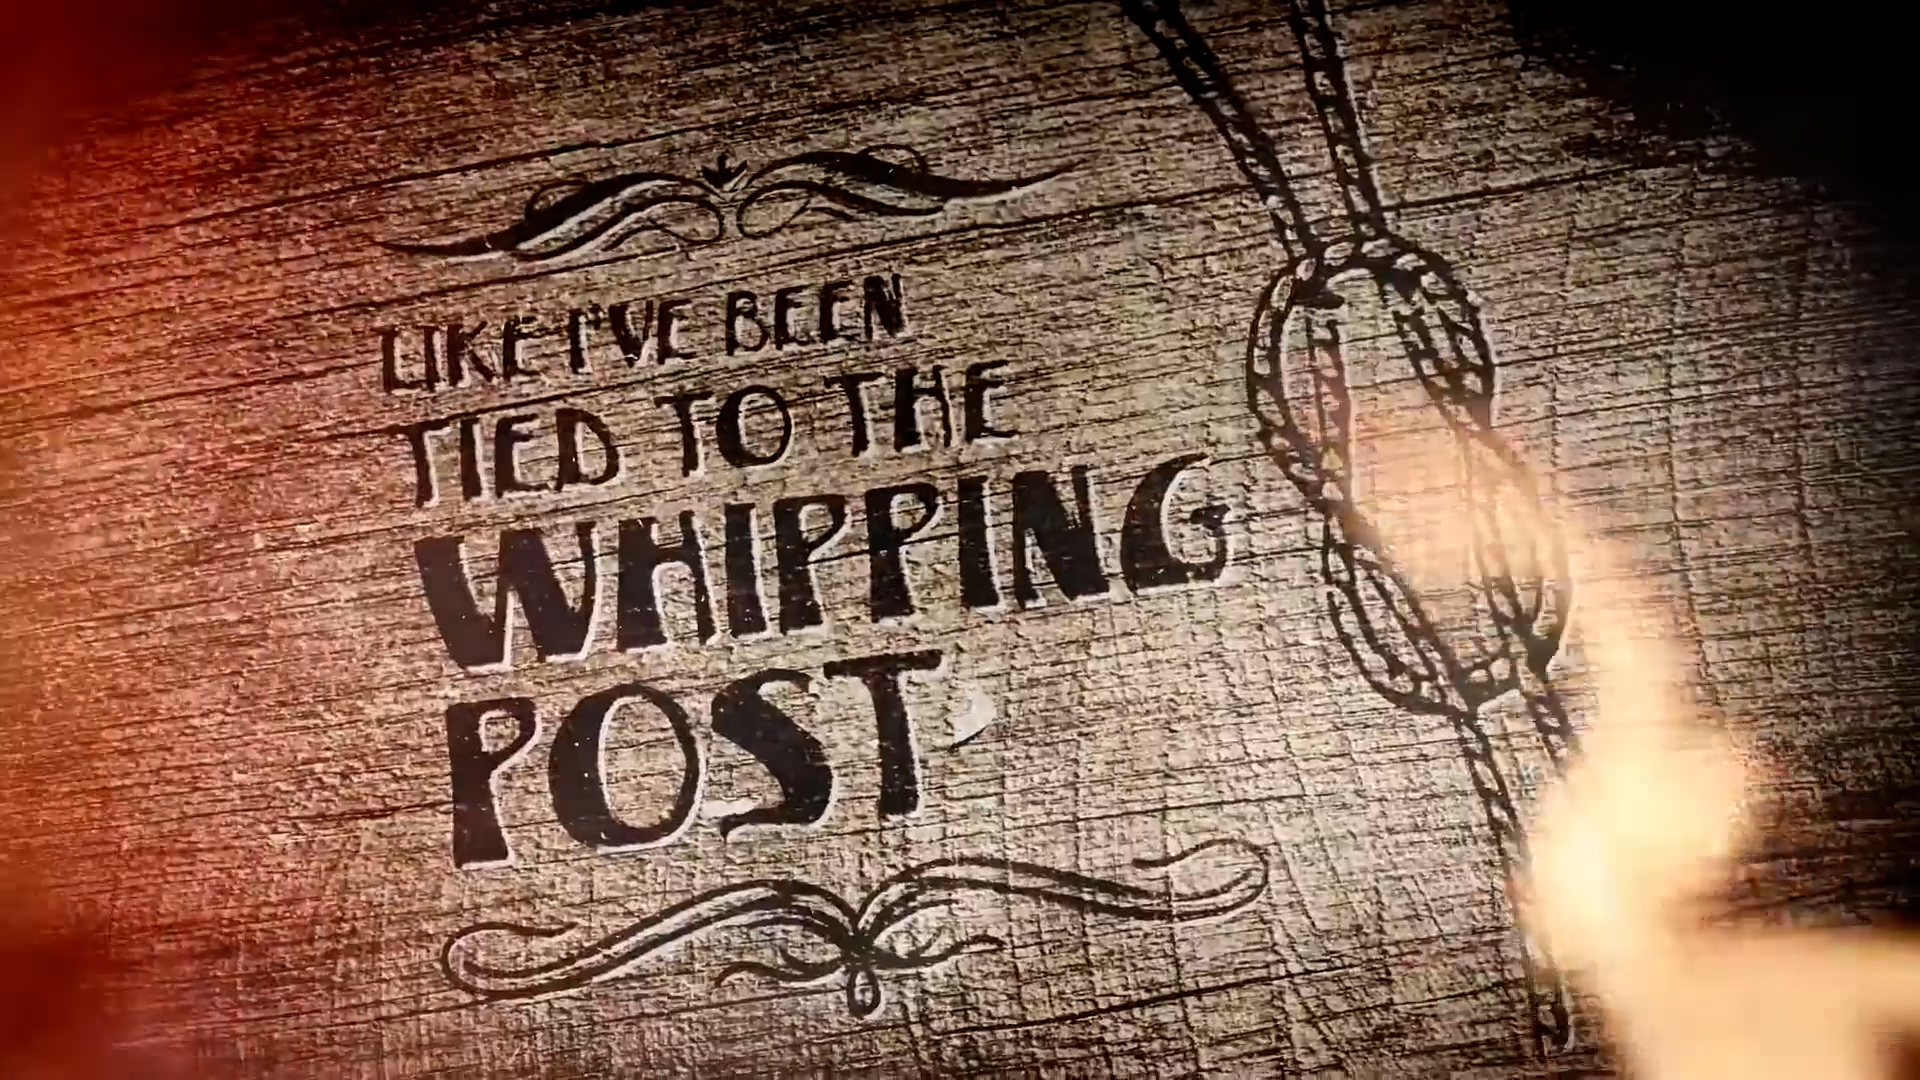 The official lyric video for Whipping Post by The Allman Brothers Band